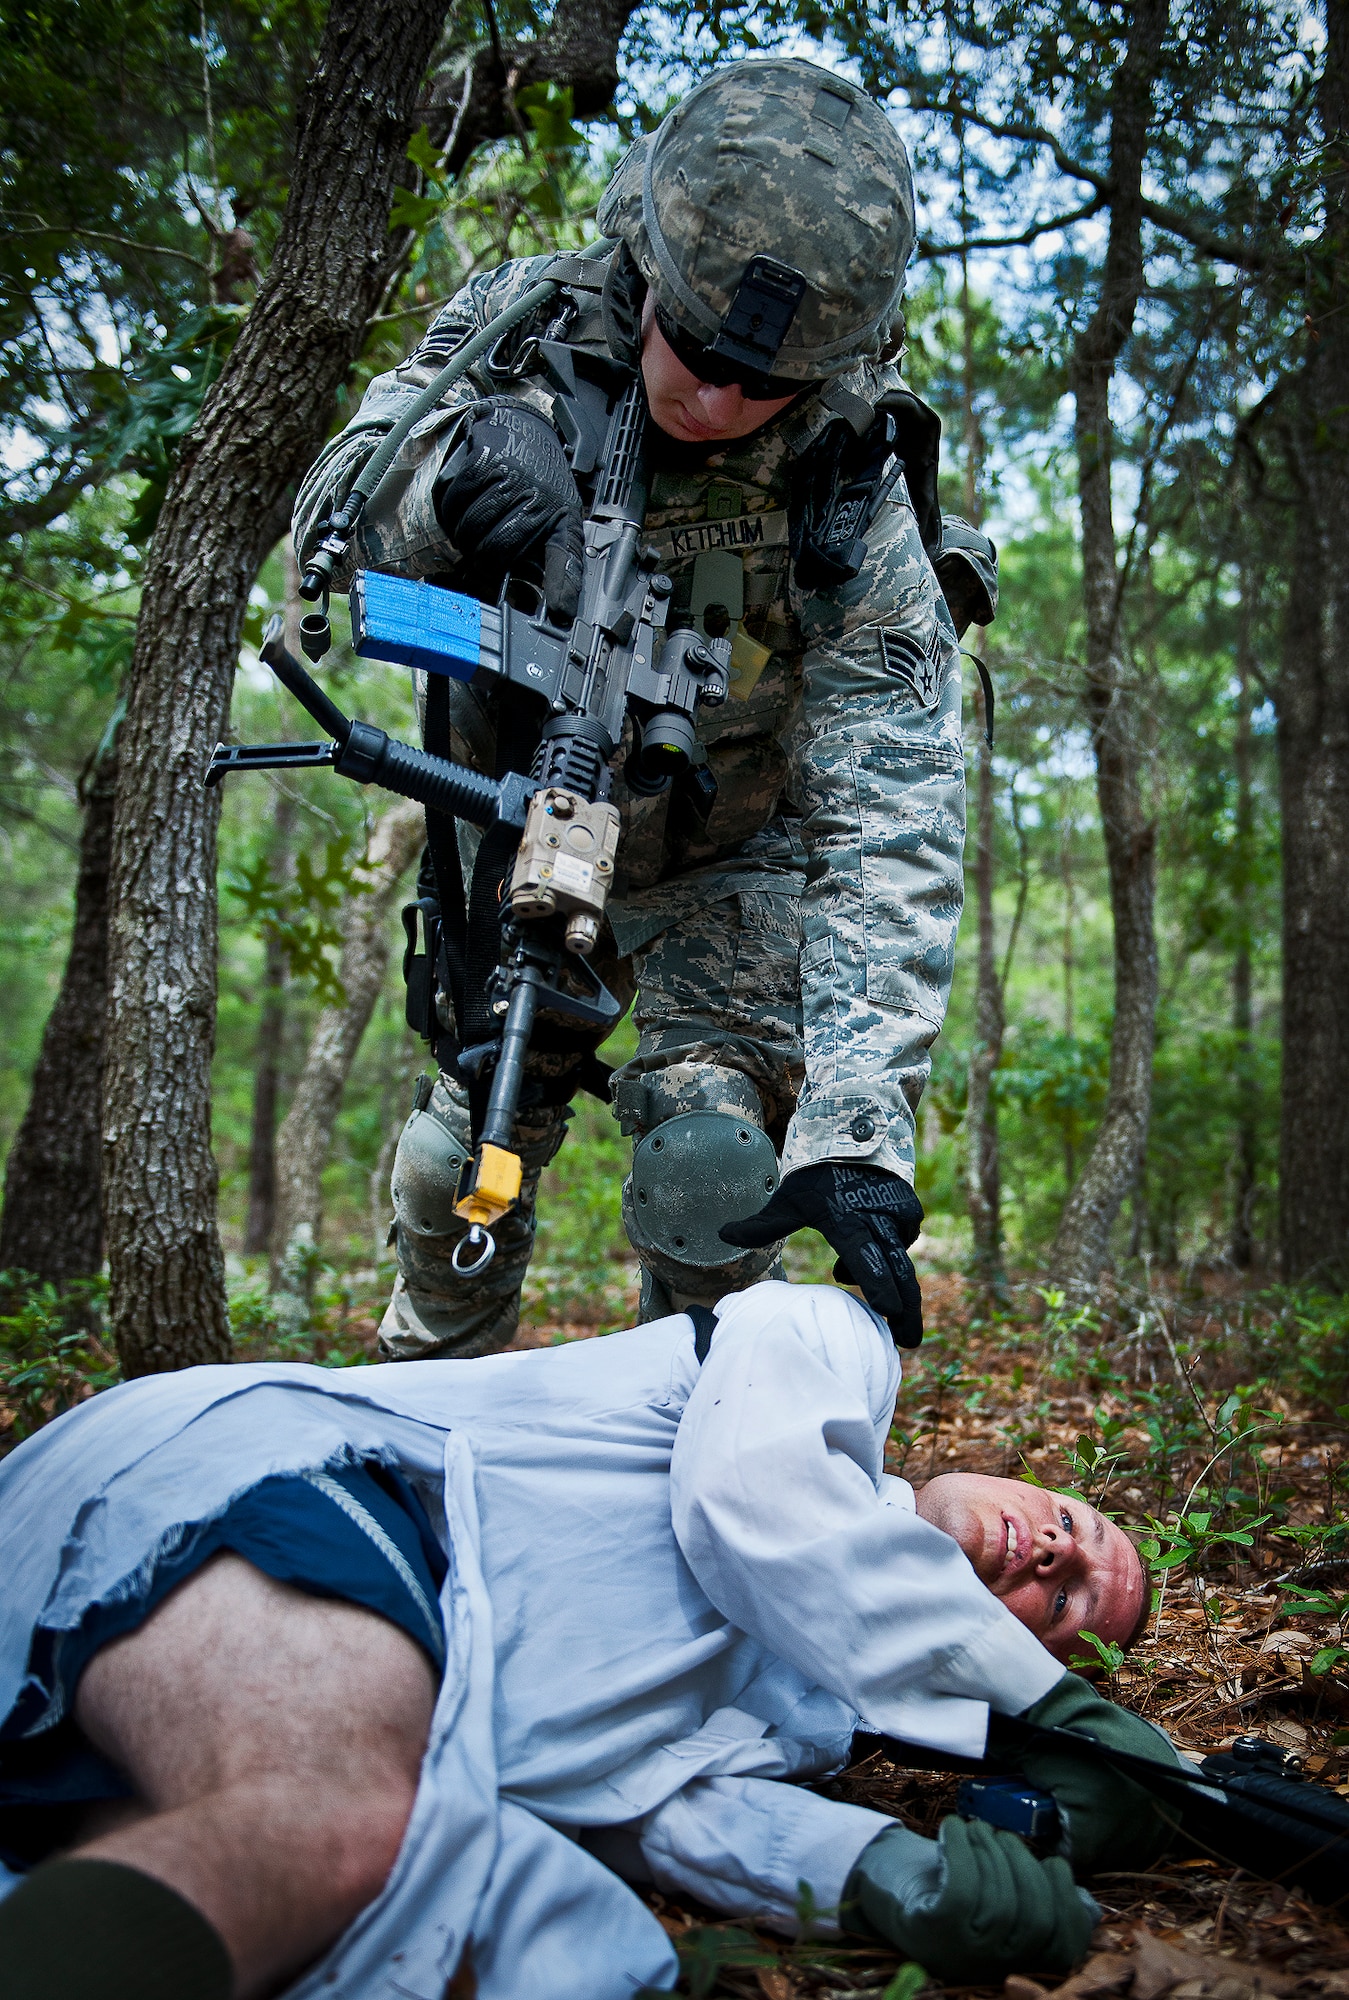 Senior Airman Jesse Kethum, of the 164th Security Forces Squadron, examines an enemy combatant after a fire-fight while on a dismounted patrol during the three-day Brave Defender field training exercise May 19 at Eglin Air Force Base, Fla.  The exercise is the culmination of Air Force Materiel Command’s six-week security forces deployment training, administered by the 96th Ground Combat Training Squadron. GCTS instructors teach 10 training classes a year, which consists of improvised explosive device detection and reaction, operating in an urban environment, mission planning, land navigation and casualty care and more. More than 140 active-duty and National Guard Airmen attended this training. (U.S. Air Force photo/Samuel King Jr.)